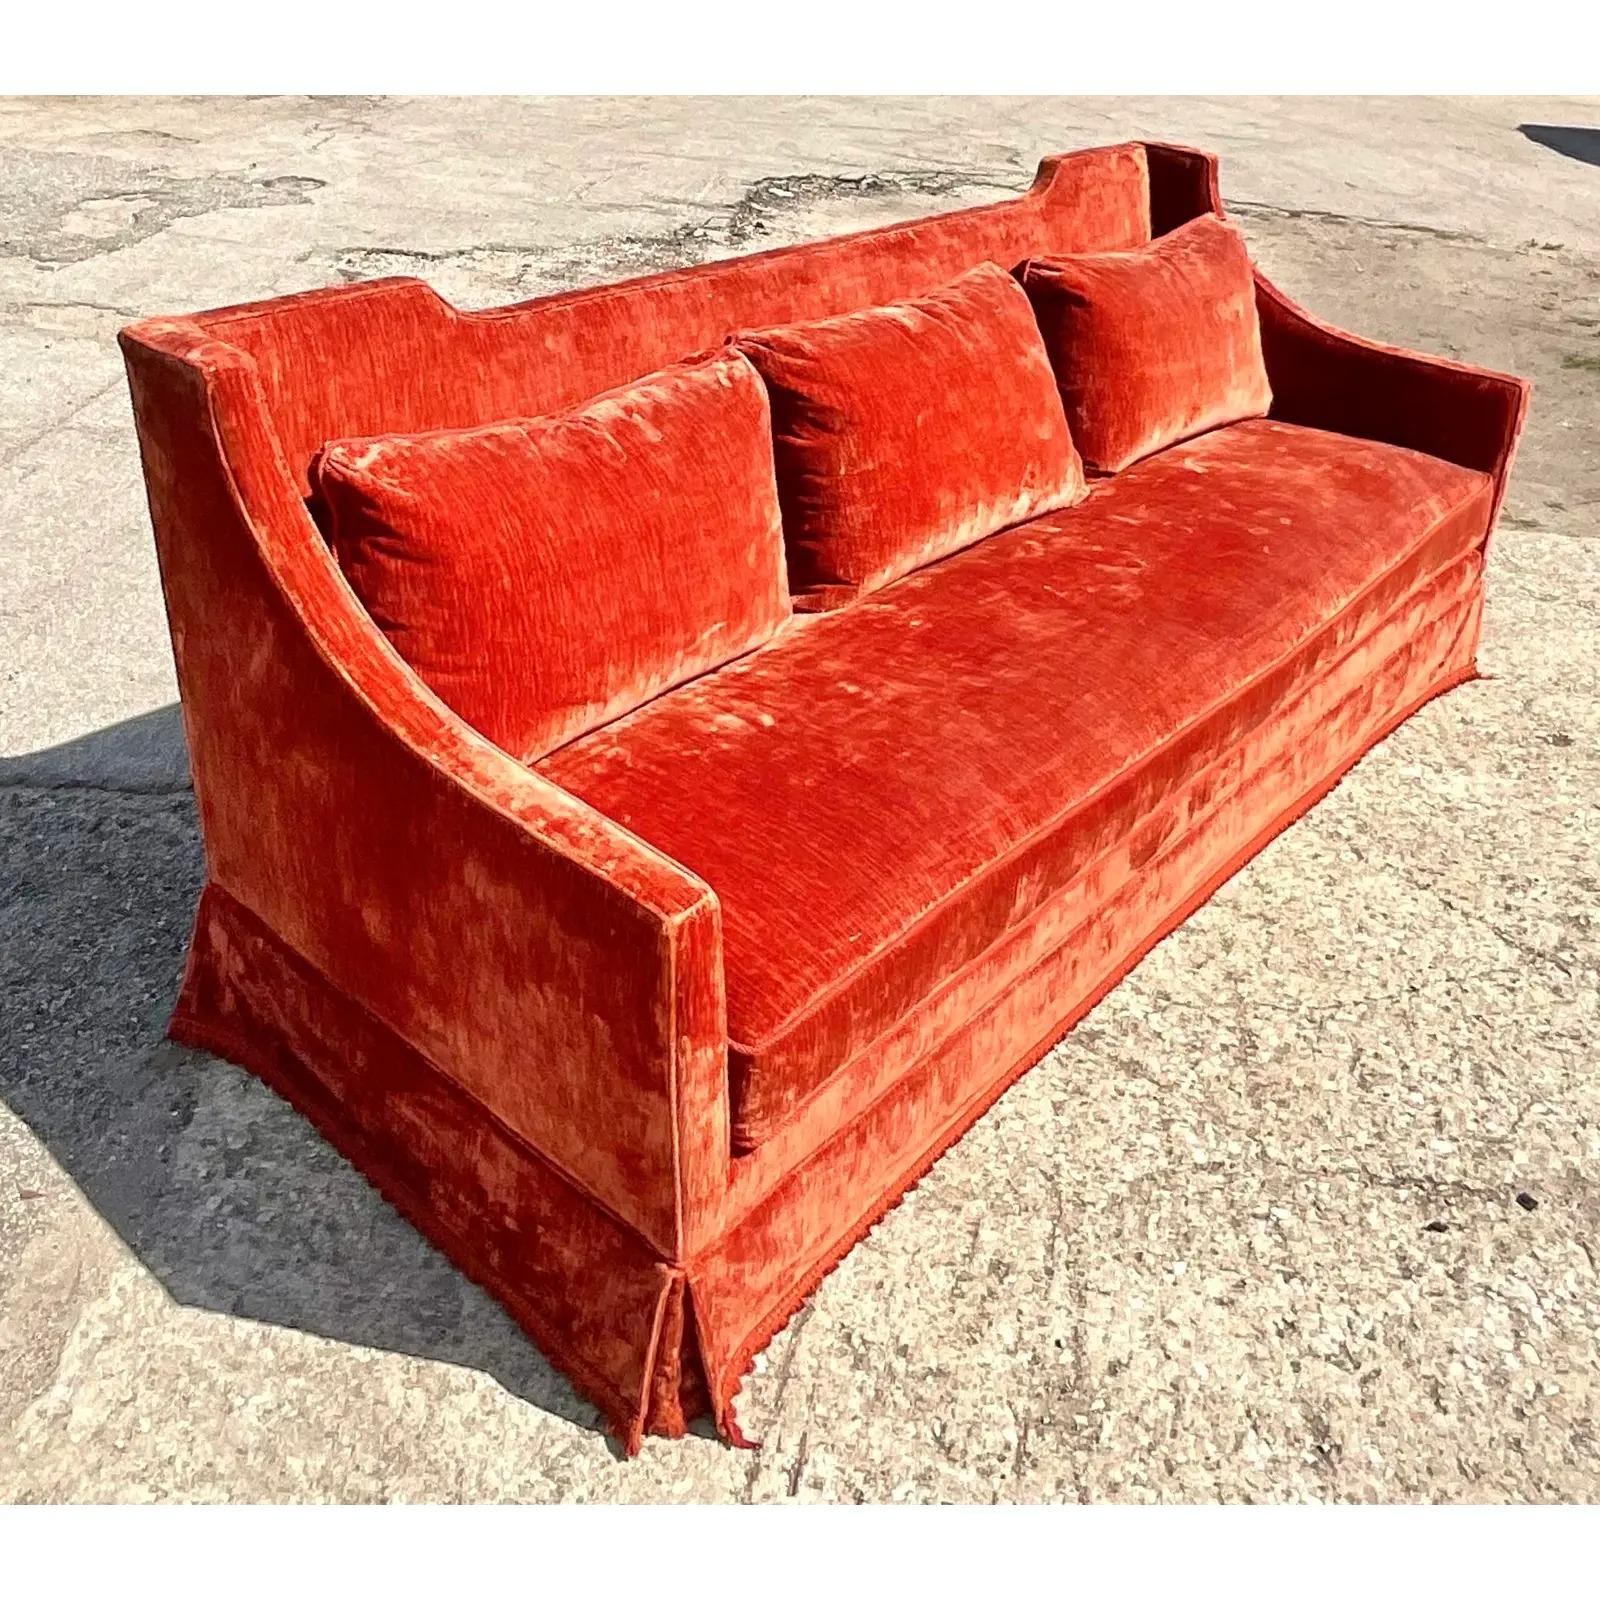 Spectacular vintage custom built Frank Parker sofa. A monumental size in a chic high back design. Deep orange crushed velvet with a beautiful warm sheen. Acquired from a Palm Beach estate.